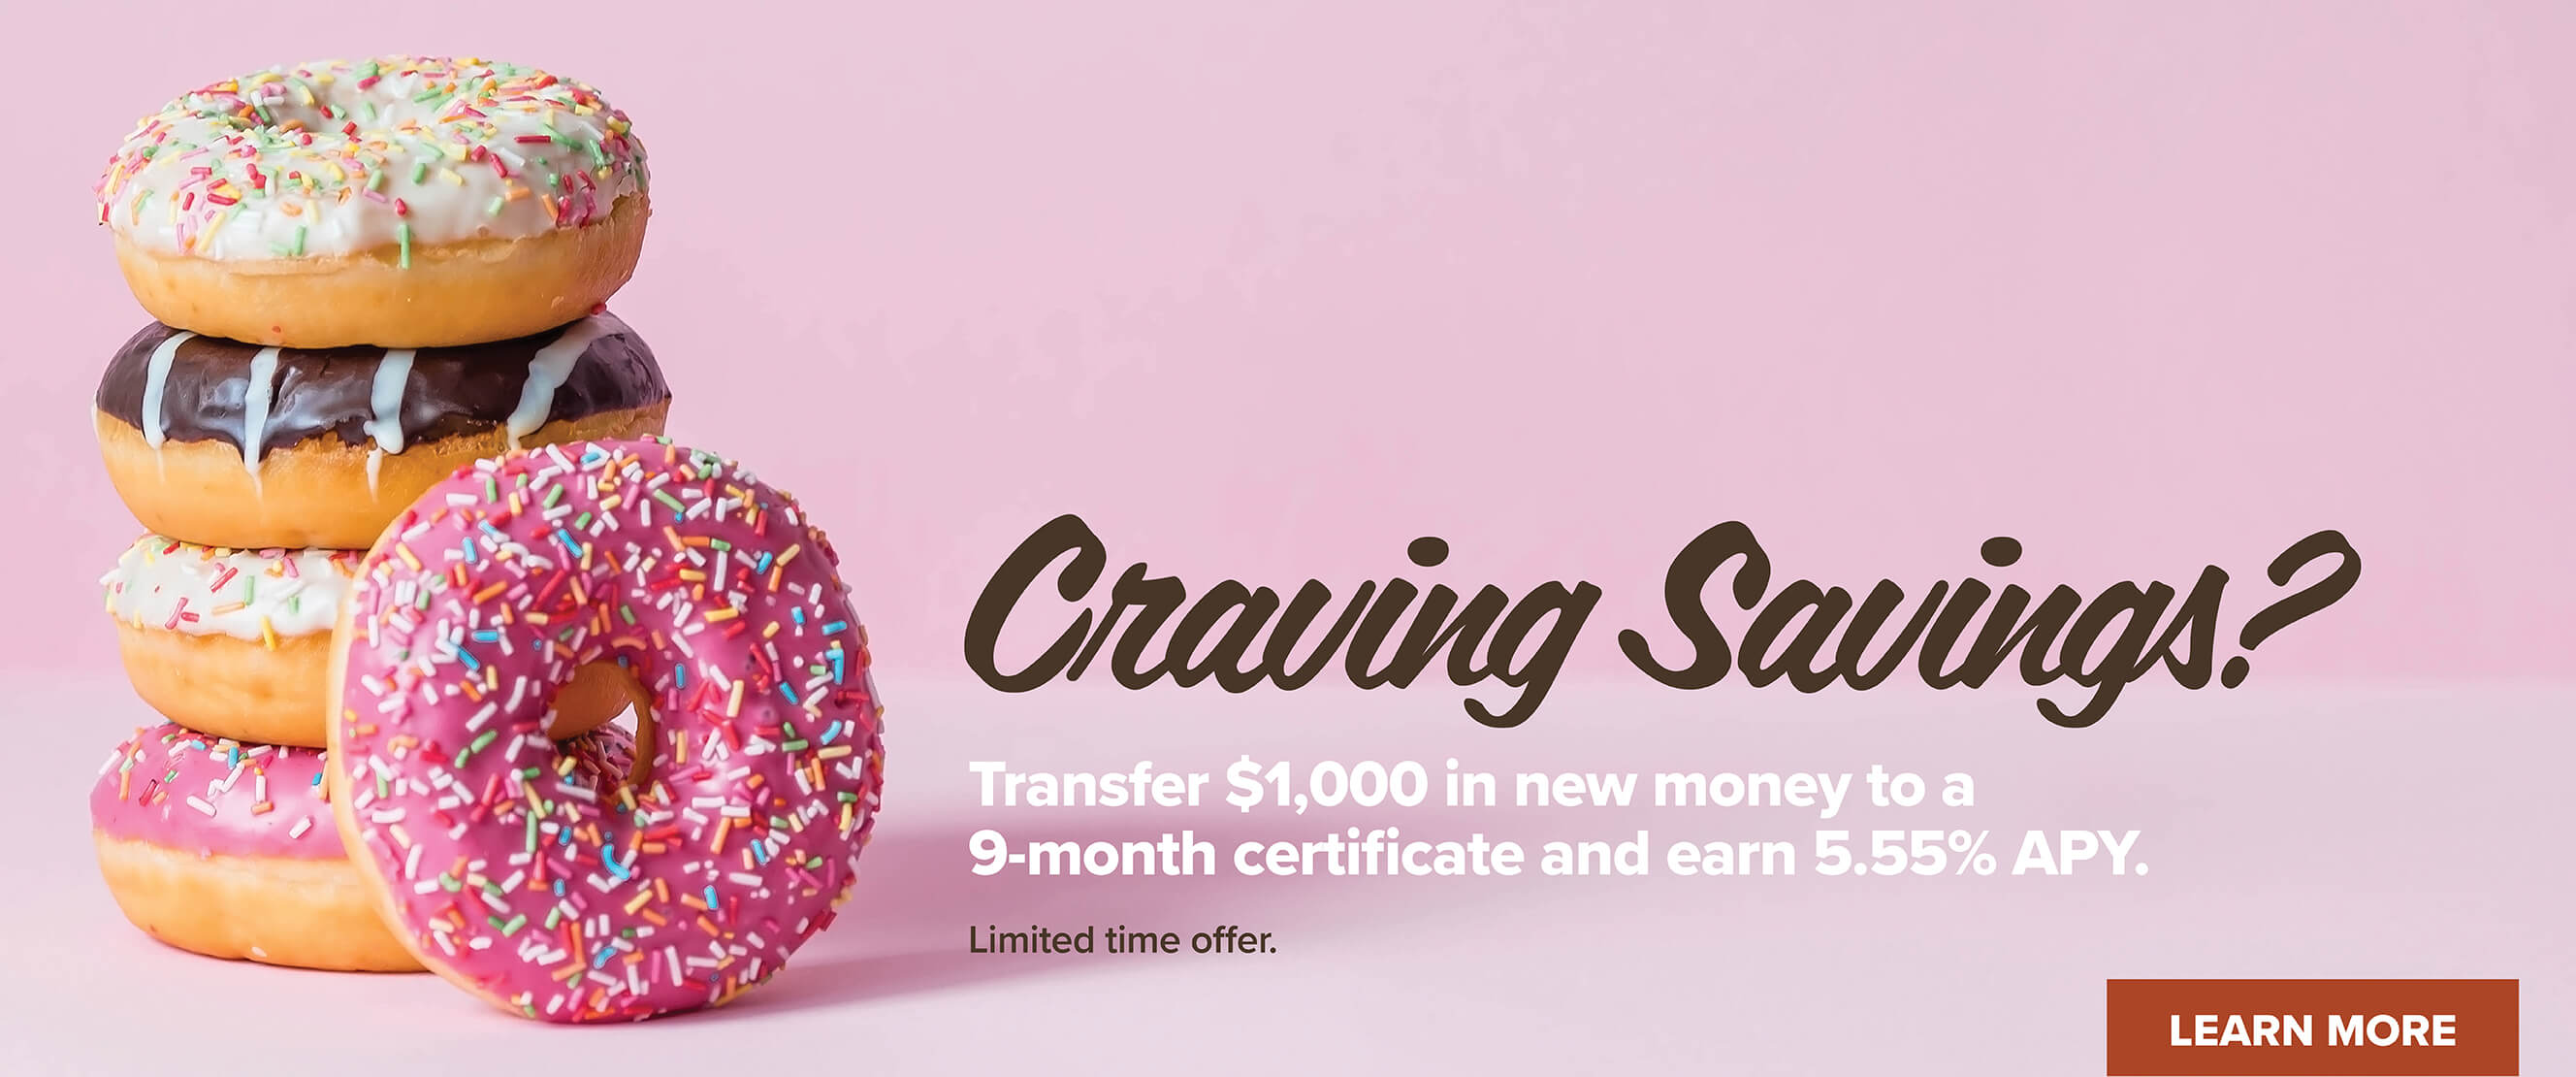 Craving savings? Transfer $1,000 in new money to a 9-month certificate and earn 5.55% APY. Limited time offer. Learn More